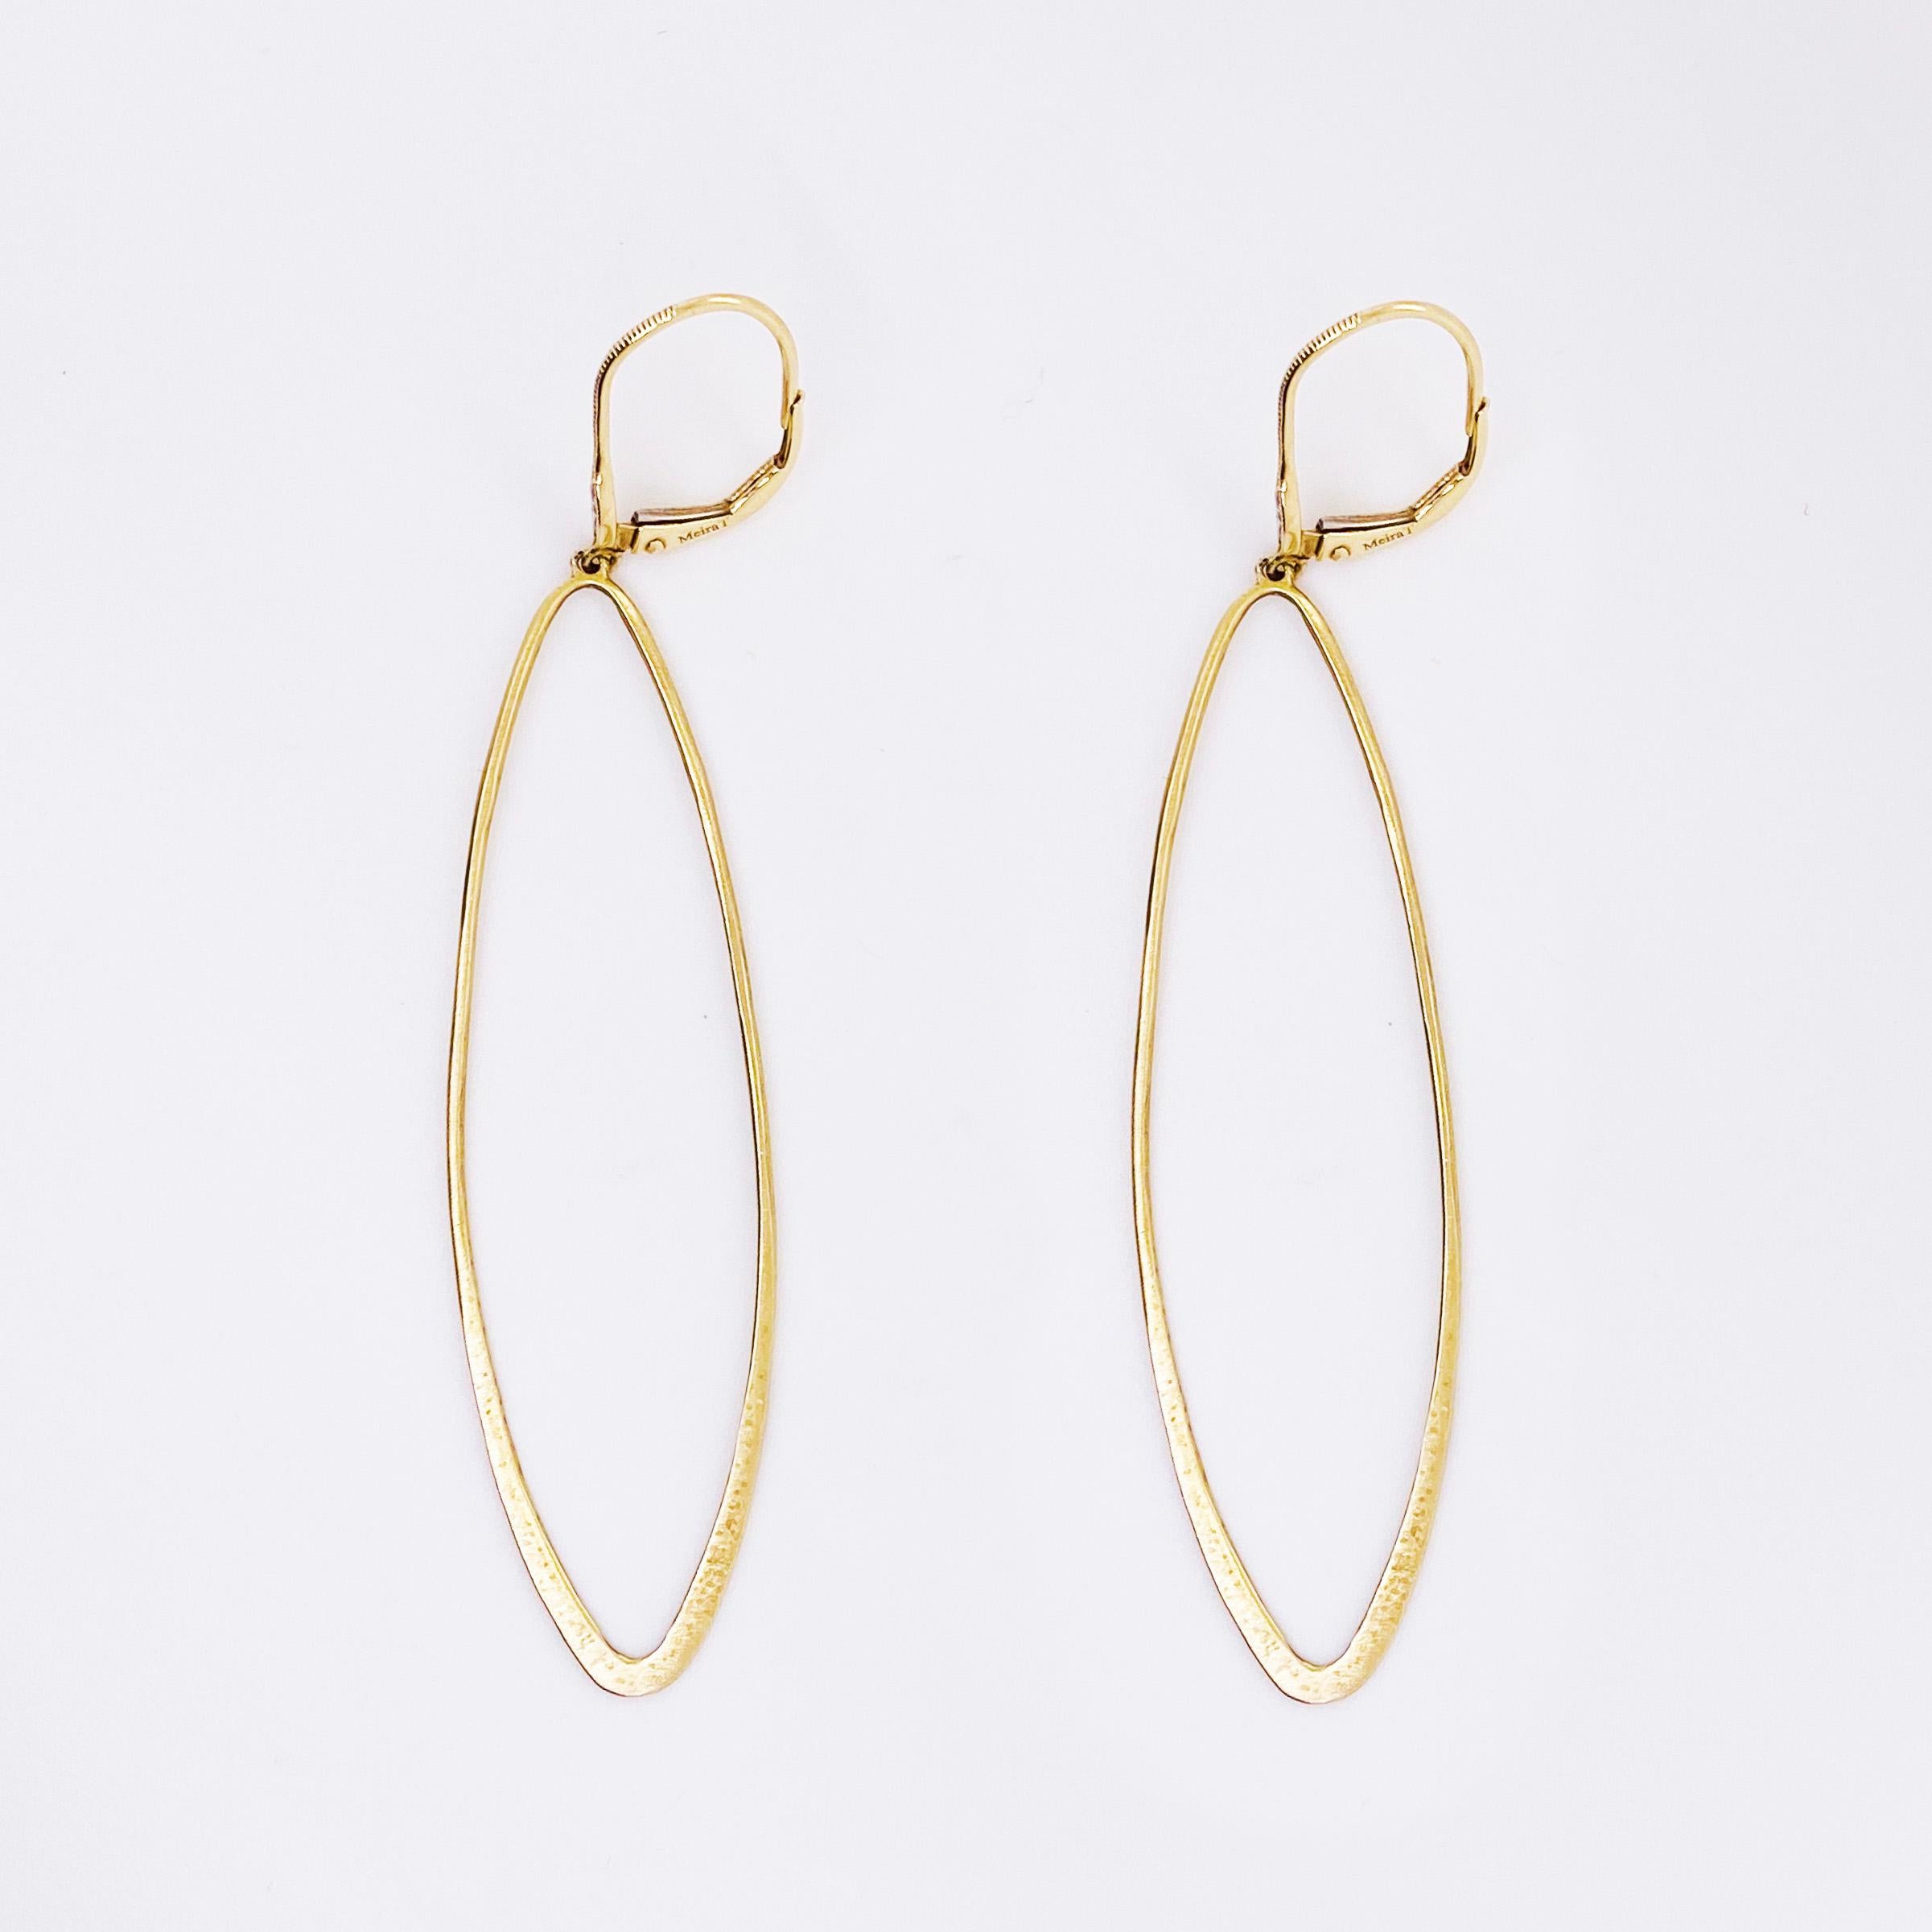 Diamond fashion earring dangle! The dangle earrings are an elongated oval design with a satin finish and diamond sparkle. 

Metal Quality: 14K Yellow Gold
Earring Type: Dangles
Earring Measurements:
Diamond: .02 Carat total diamond weight
Diamond